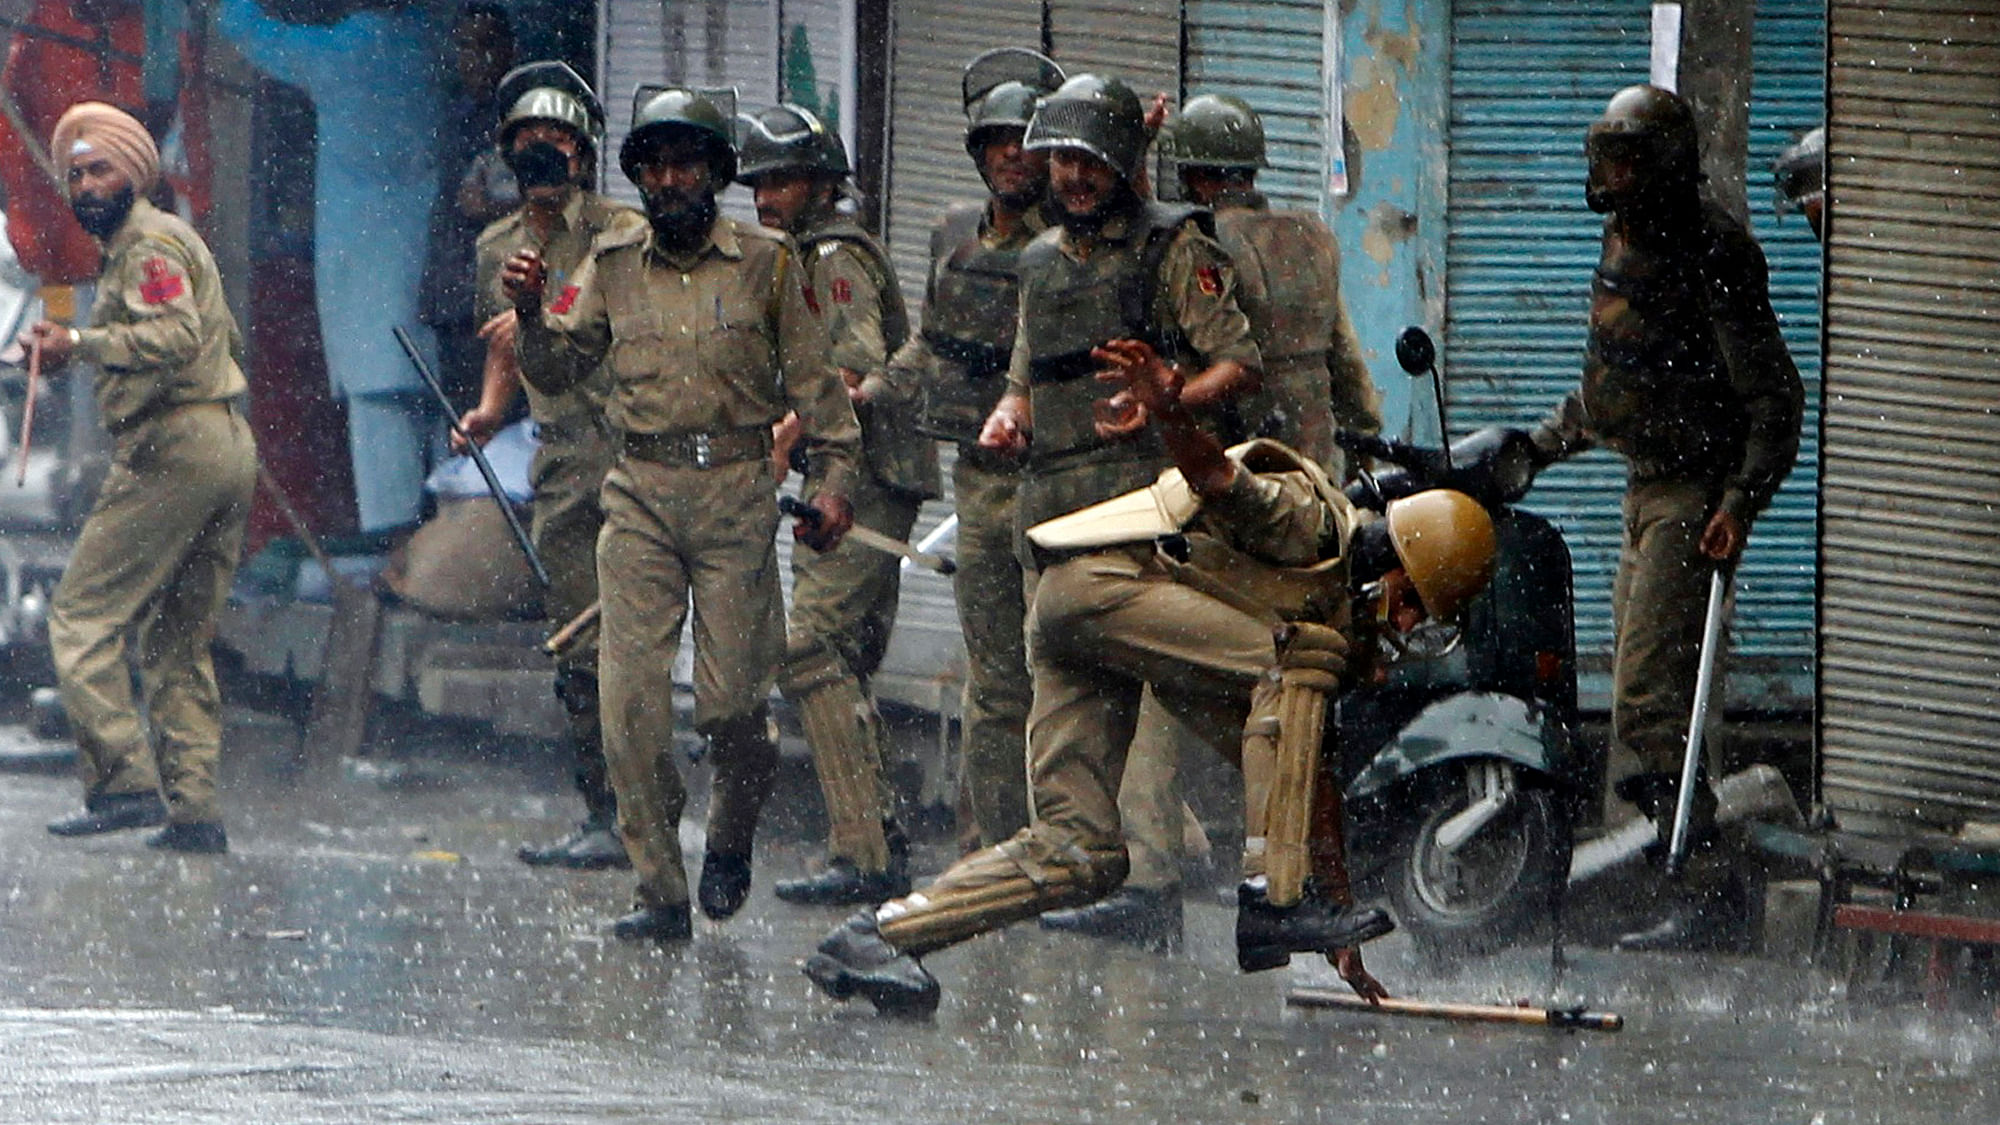 An Indian policeman falls after throwing a piece of stone towards protesters in Srinagar. (Photo: Reuters)&nbsp;